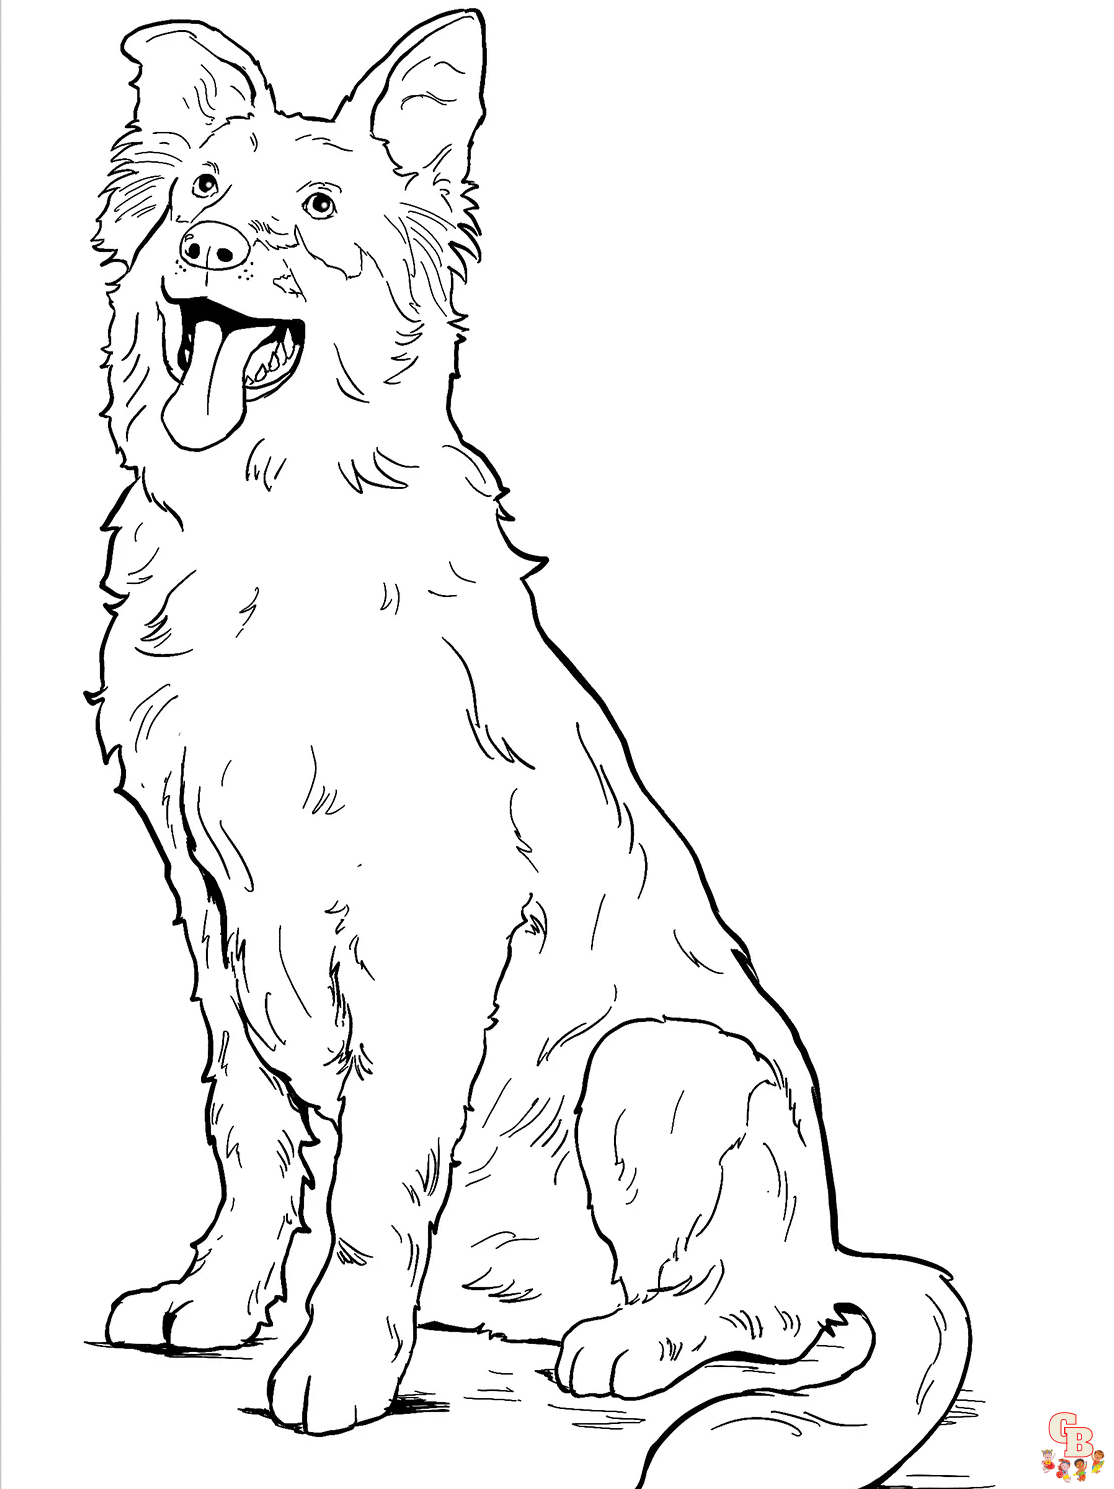 Collie Coloring Pages 1